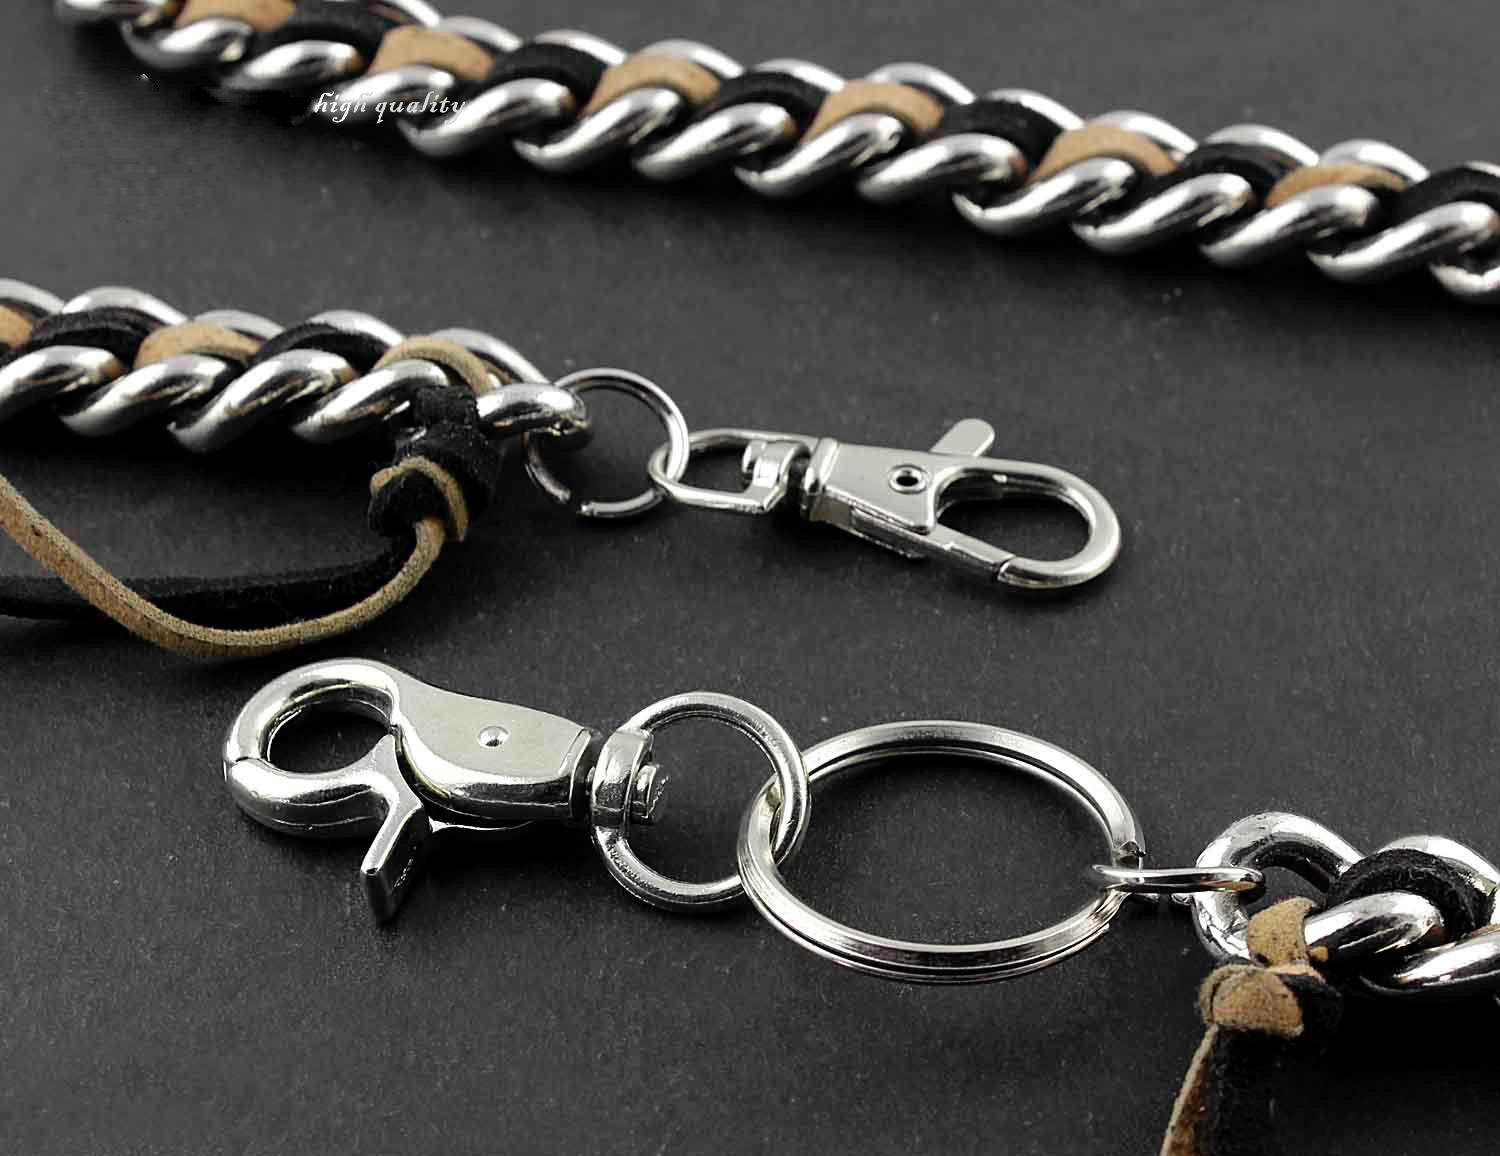 Solid Stainless Steel Leather Braided Long Wallet Chain Cool Punk Rock ...